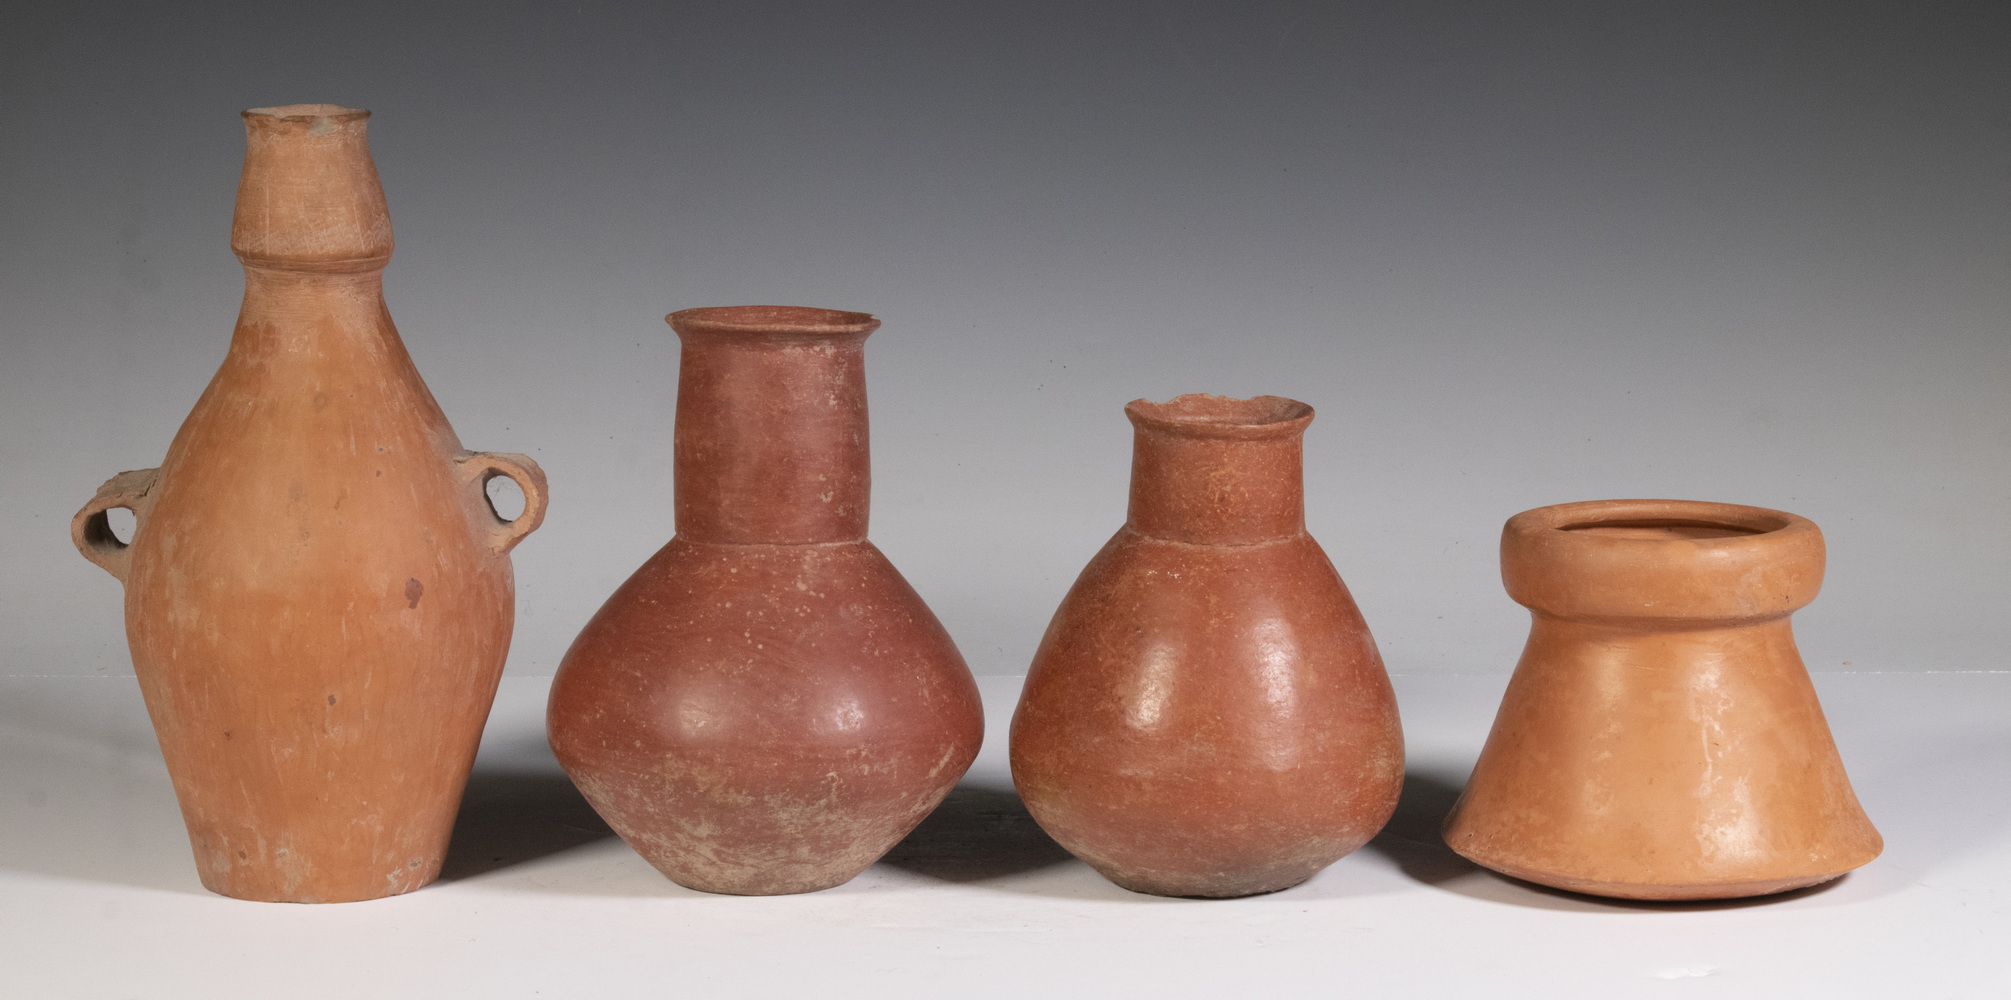  4 NEOLITHIC CHINESE POTTERY VESSELS  2b3cfa